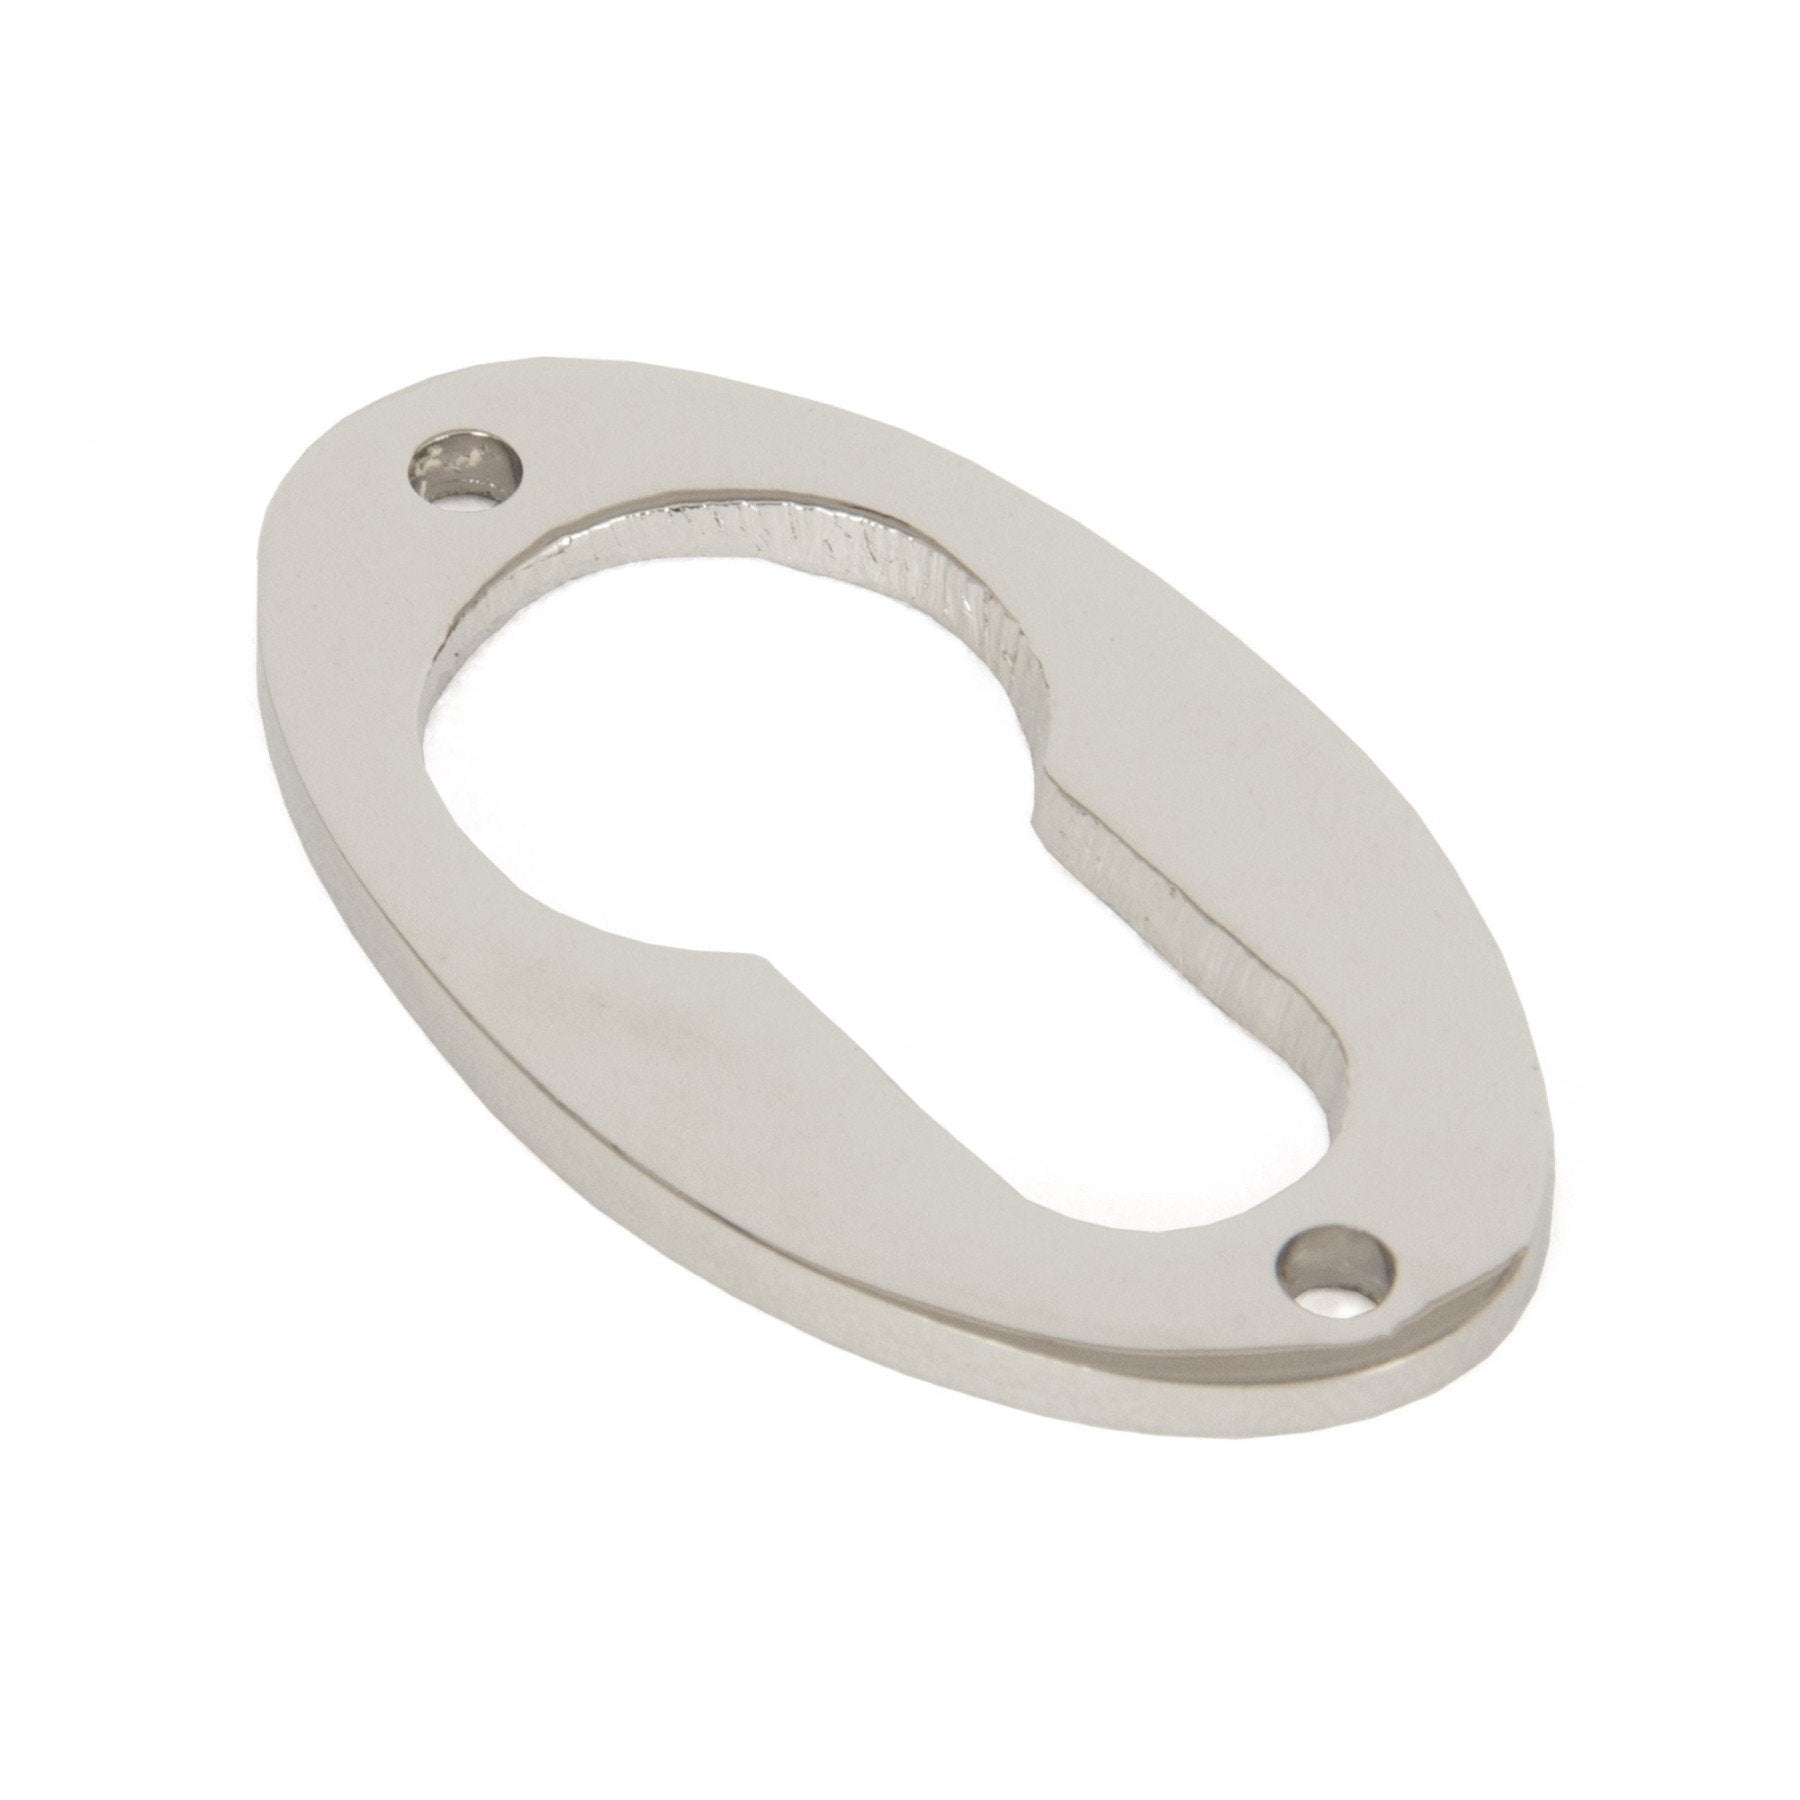 From the Anvil Polished Nickel Oval Euro Escutcheon